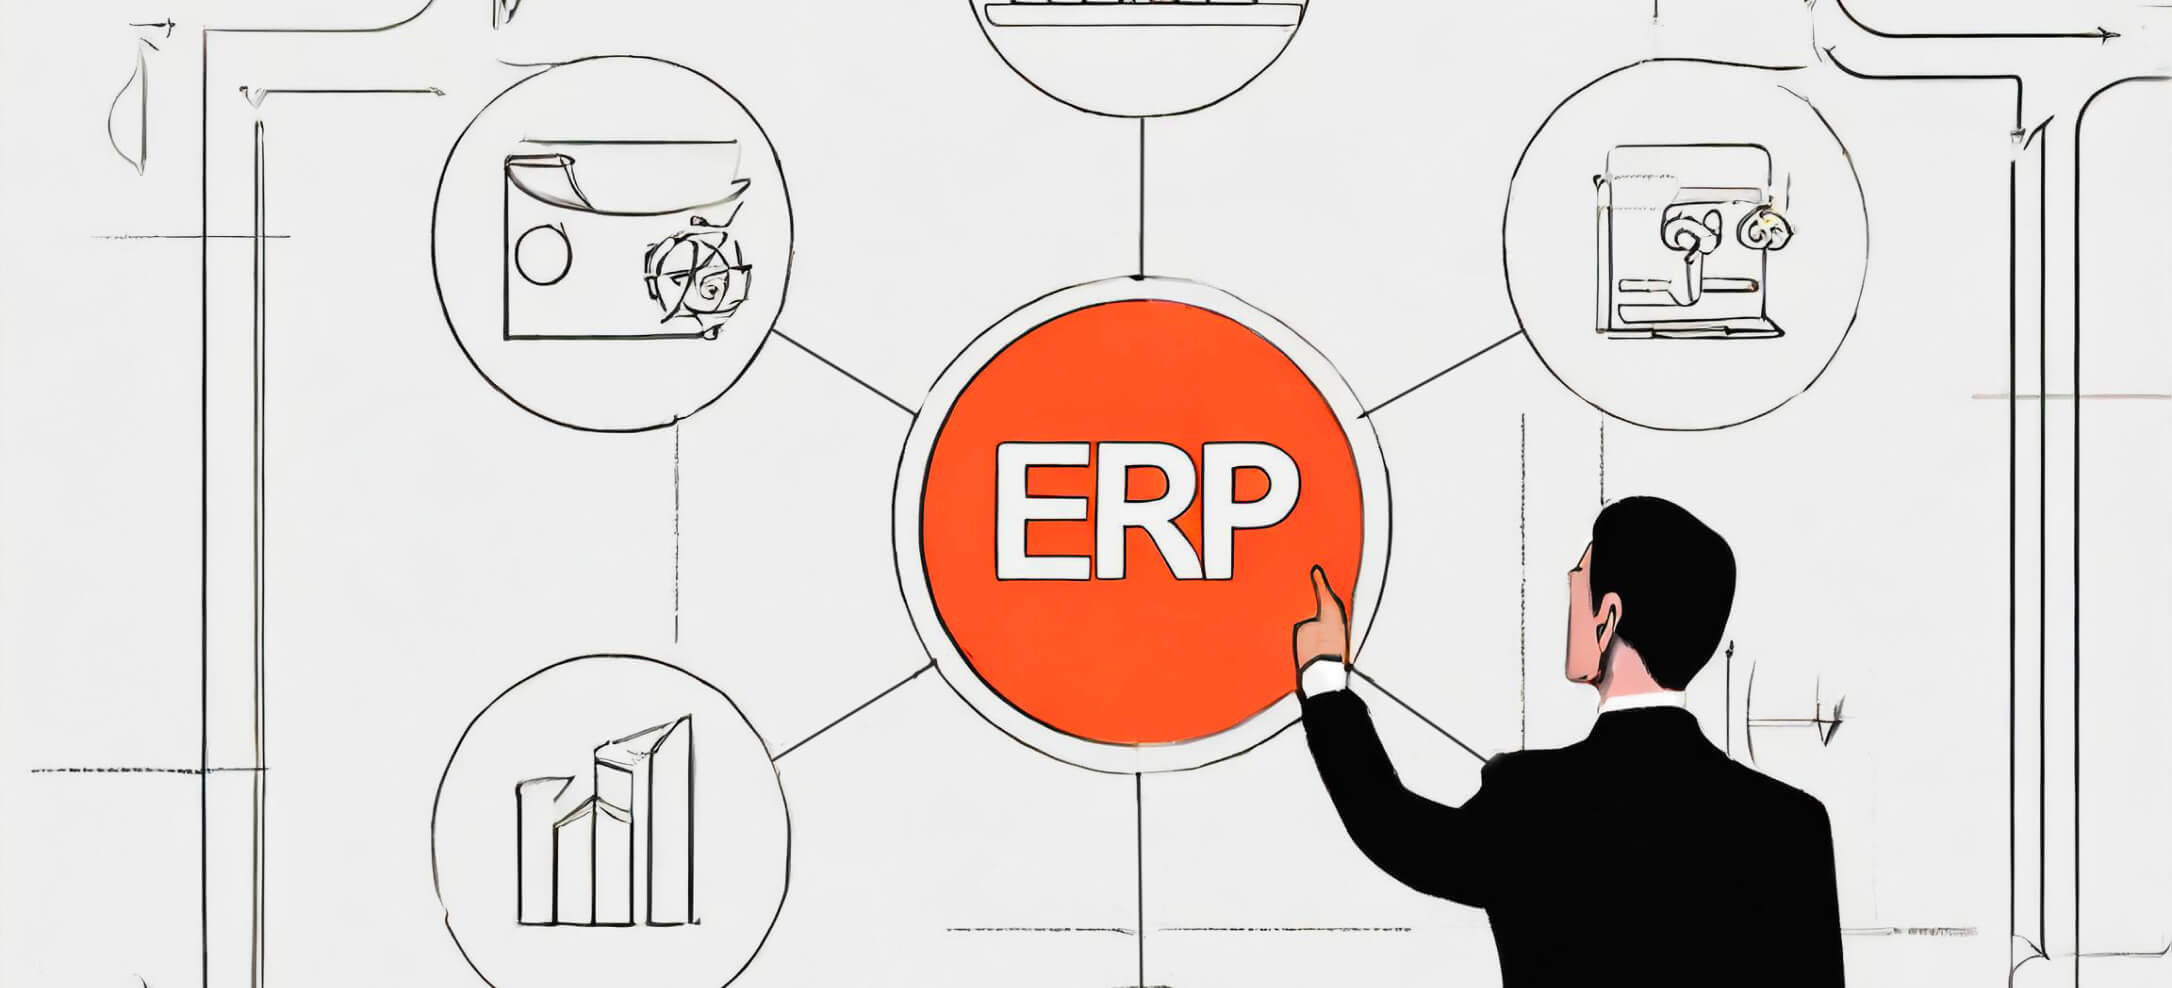 UI/UX design practices for the ERP solutions